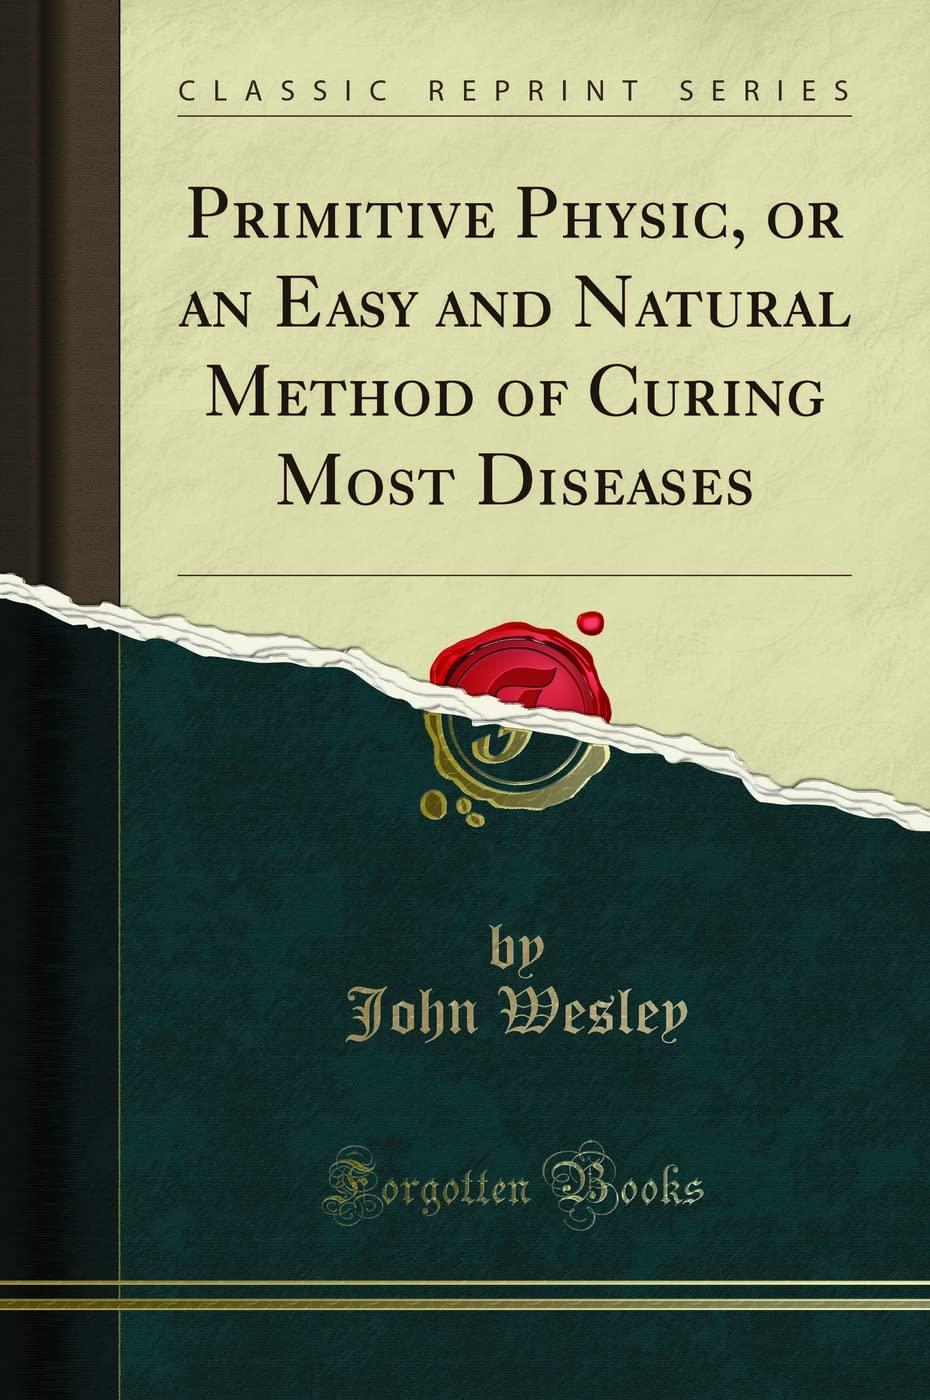 primitive physic or an easy and natural method of curing most diseases 1st edition john wesley 0260225371,